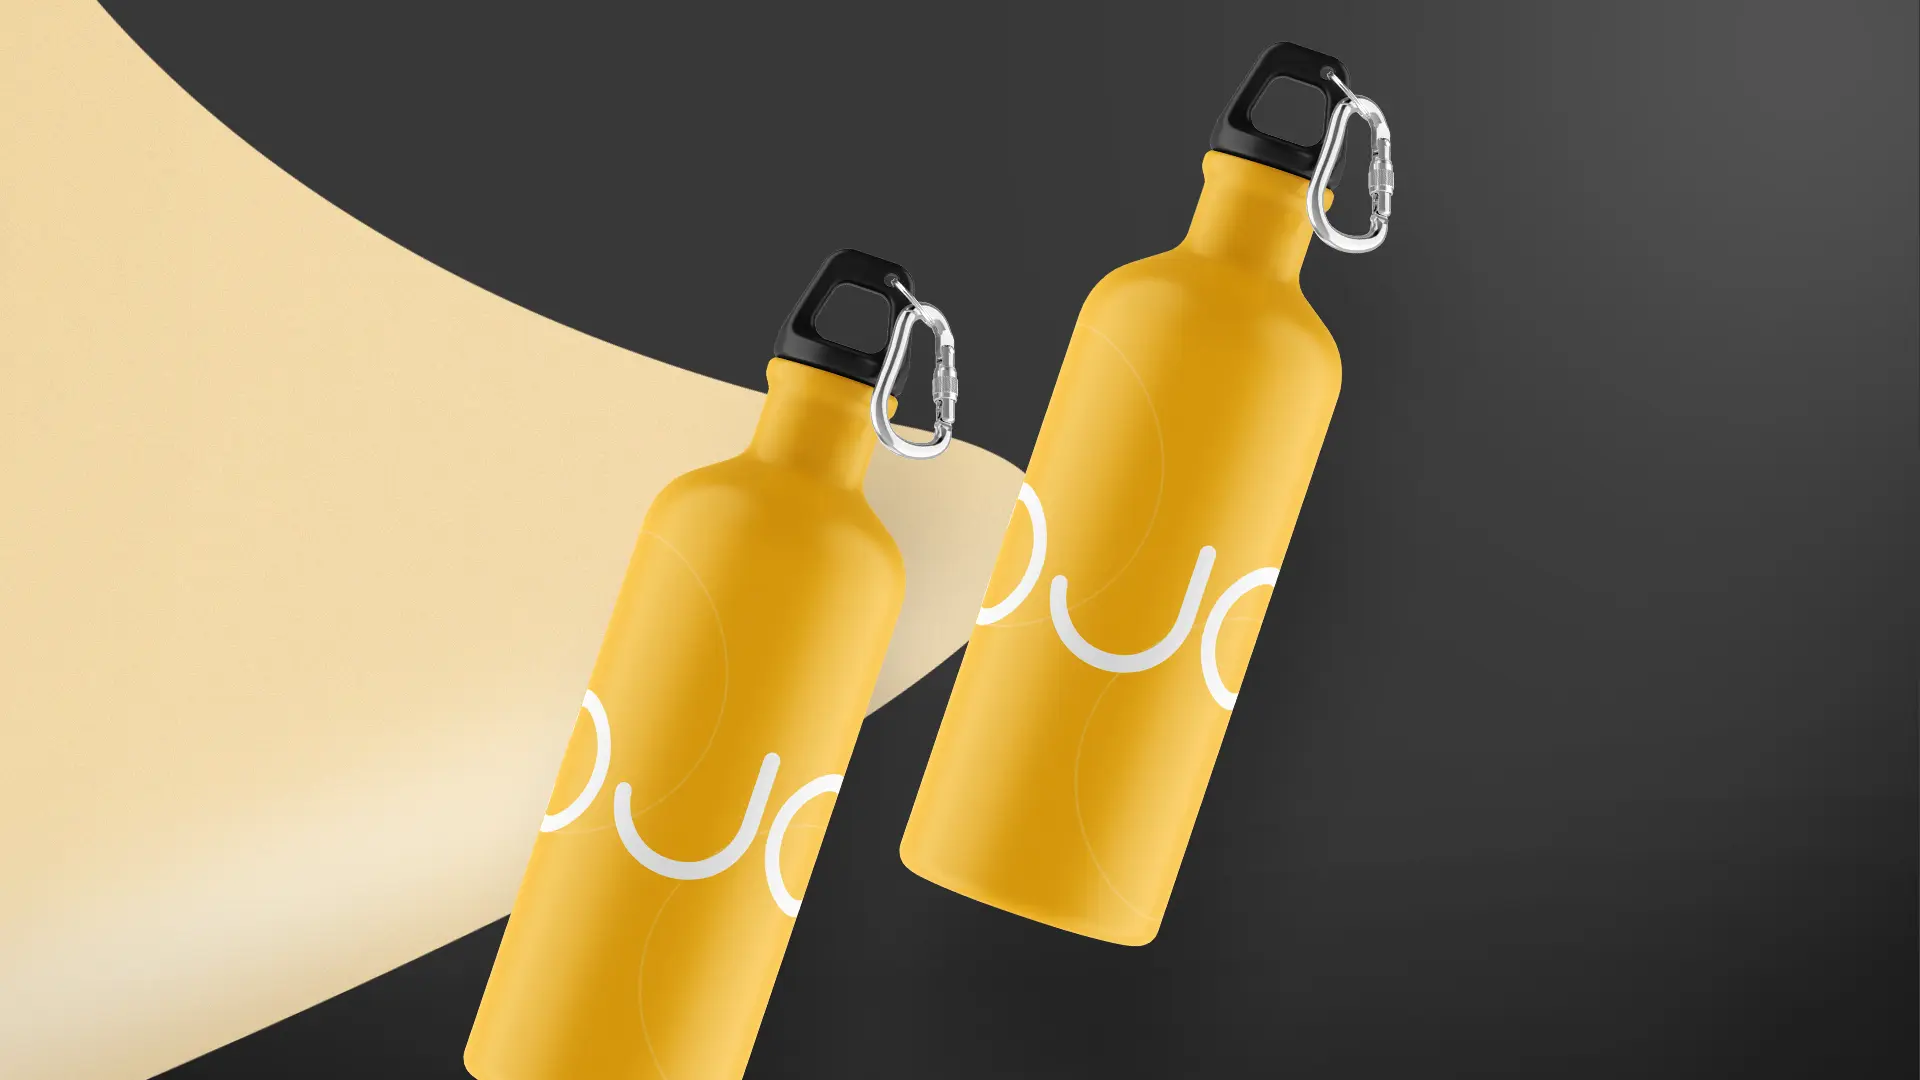 Two yellow water bottles on a black background.